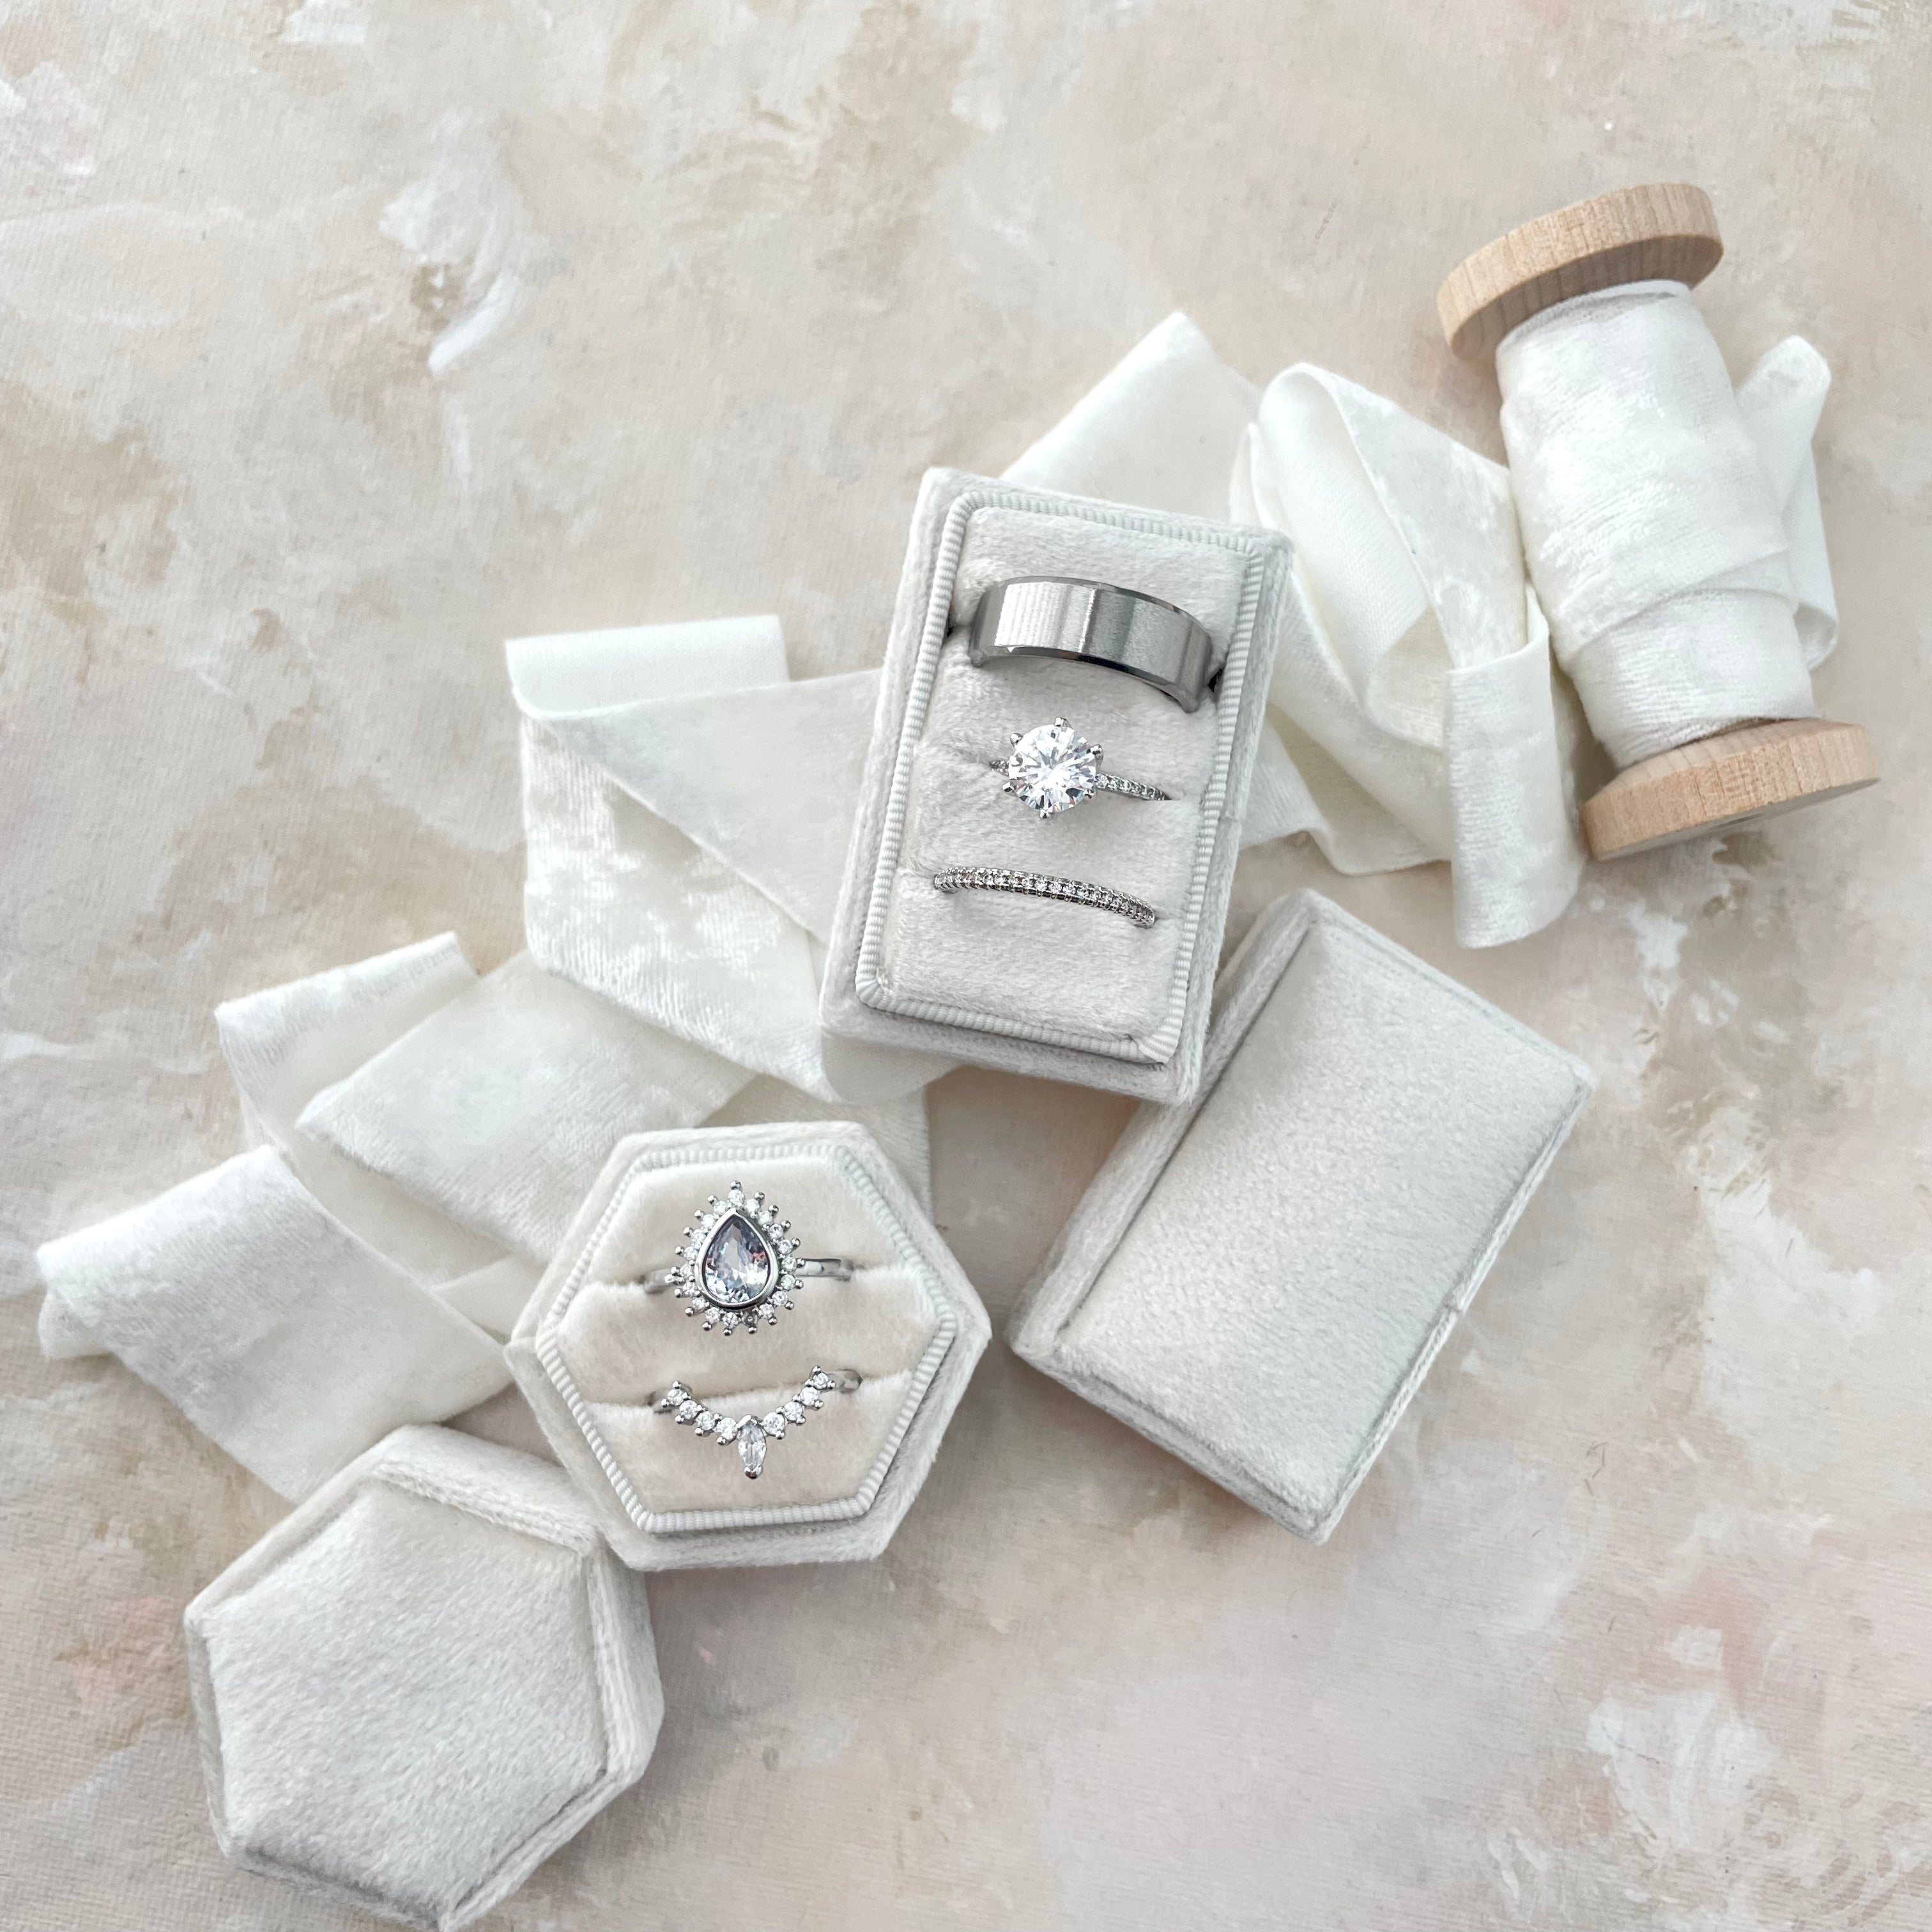 White tripe slot ring box and hexagon double slot ring box styled with ivory ribbon - Wedding Flat lay props from Champagne & GRIT